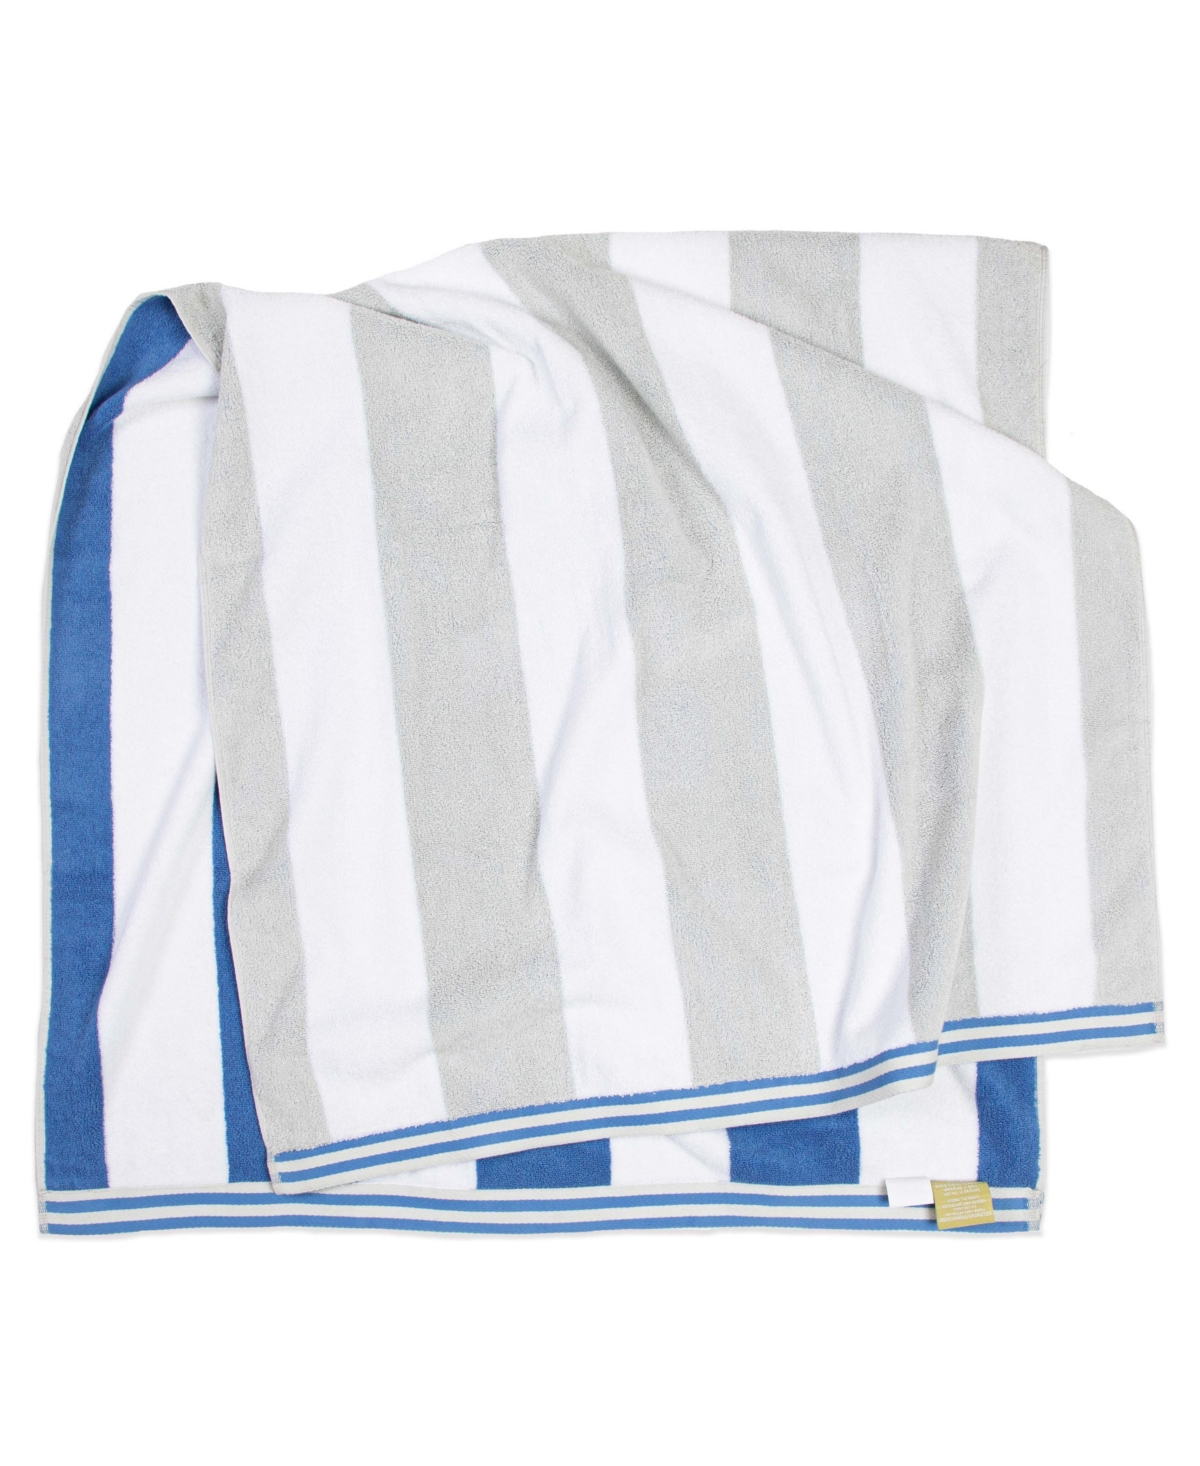 Aston And Arden Reversible Luxury Beach Towel (35x70 In., 600 Gsm), Striped Color Options, Oversized, Thick, Soft Ri In Grey/blue